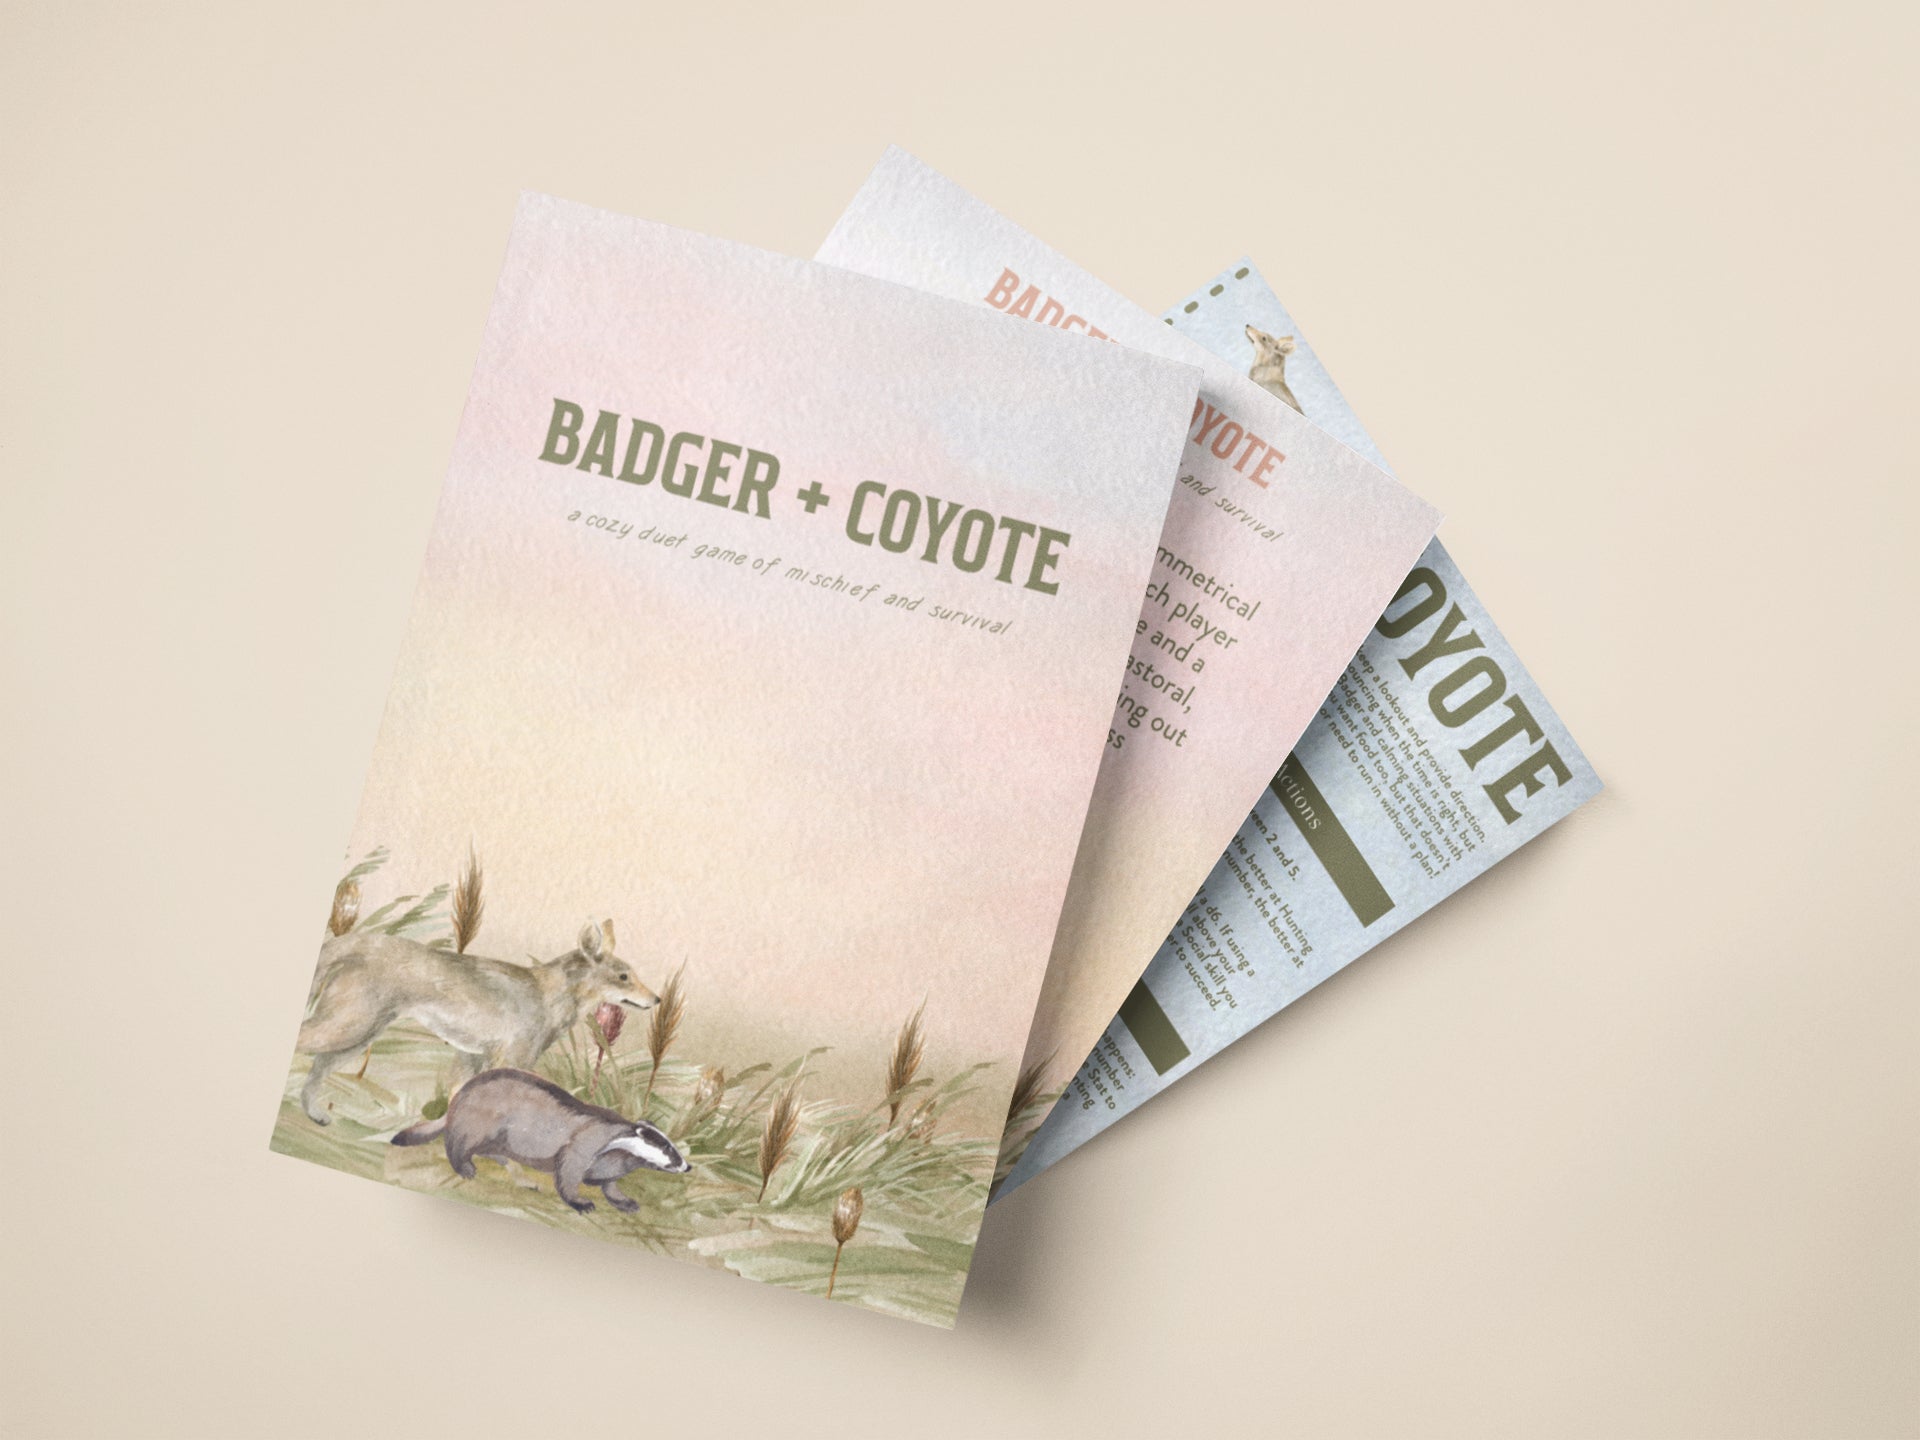 Badger + Coyote + PDF - Exalted Funeral